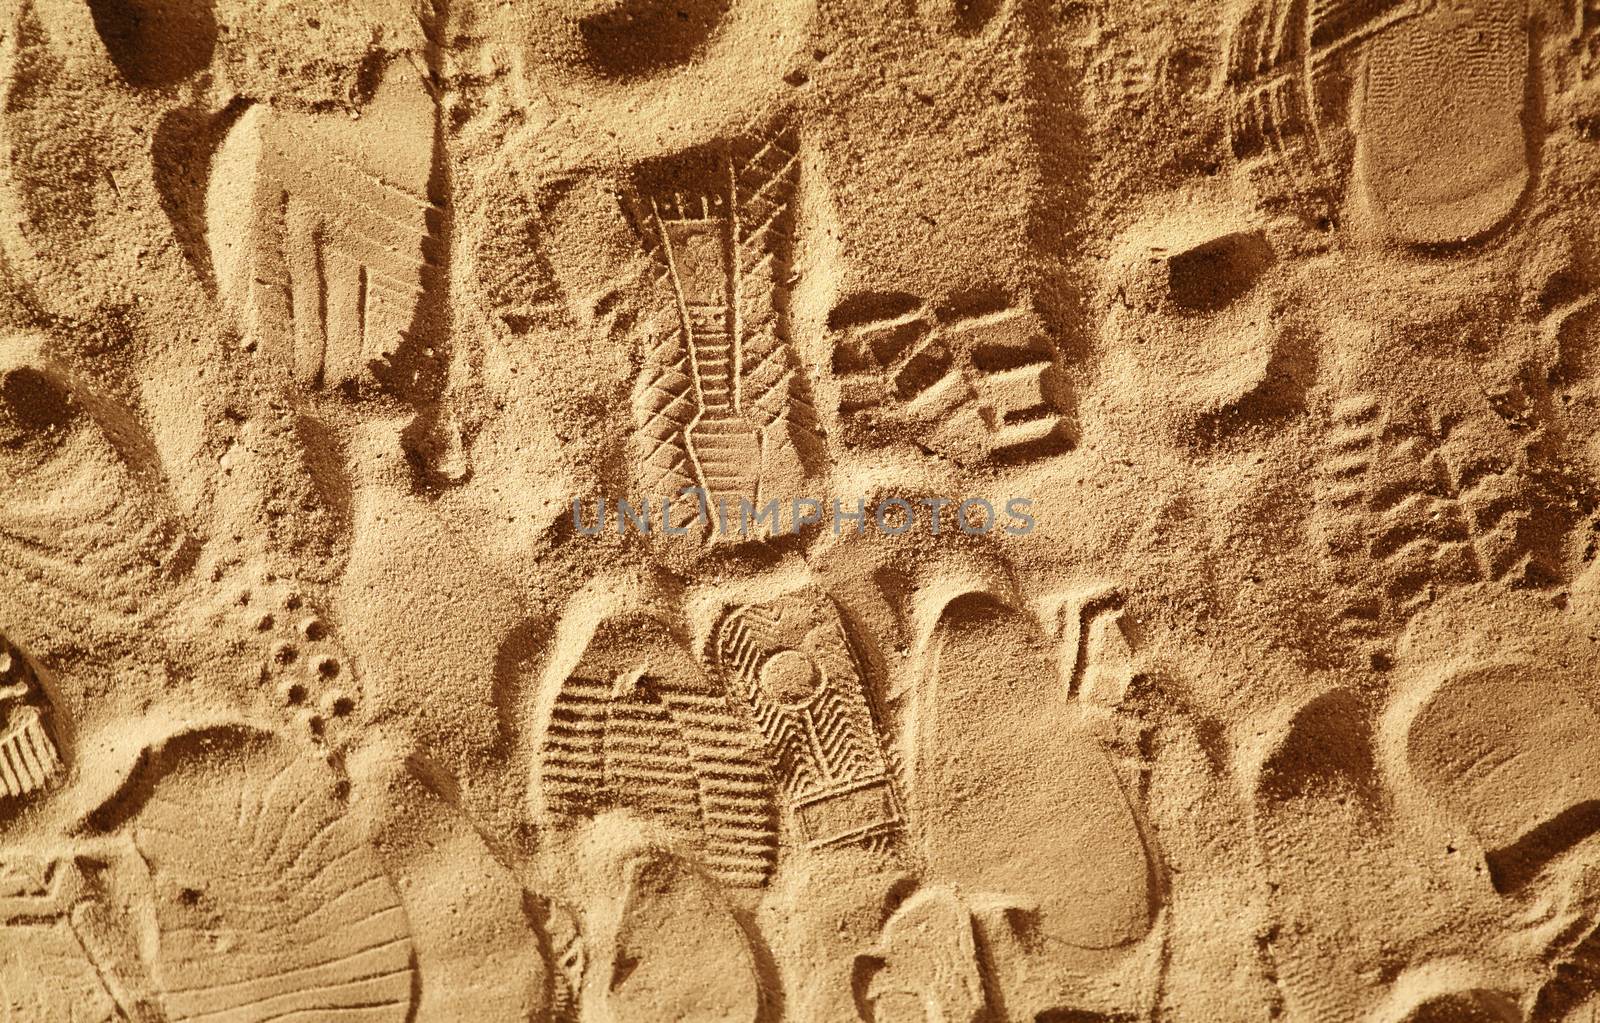 prints from various footwear on sand by ssuaphoto